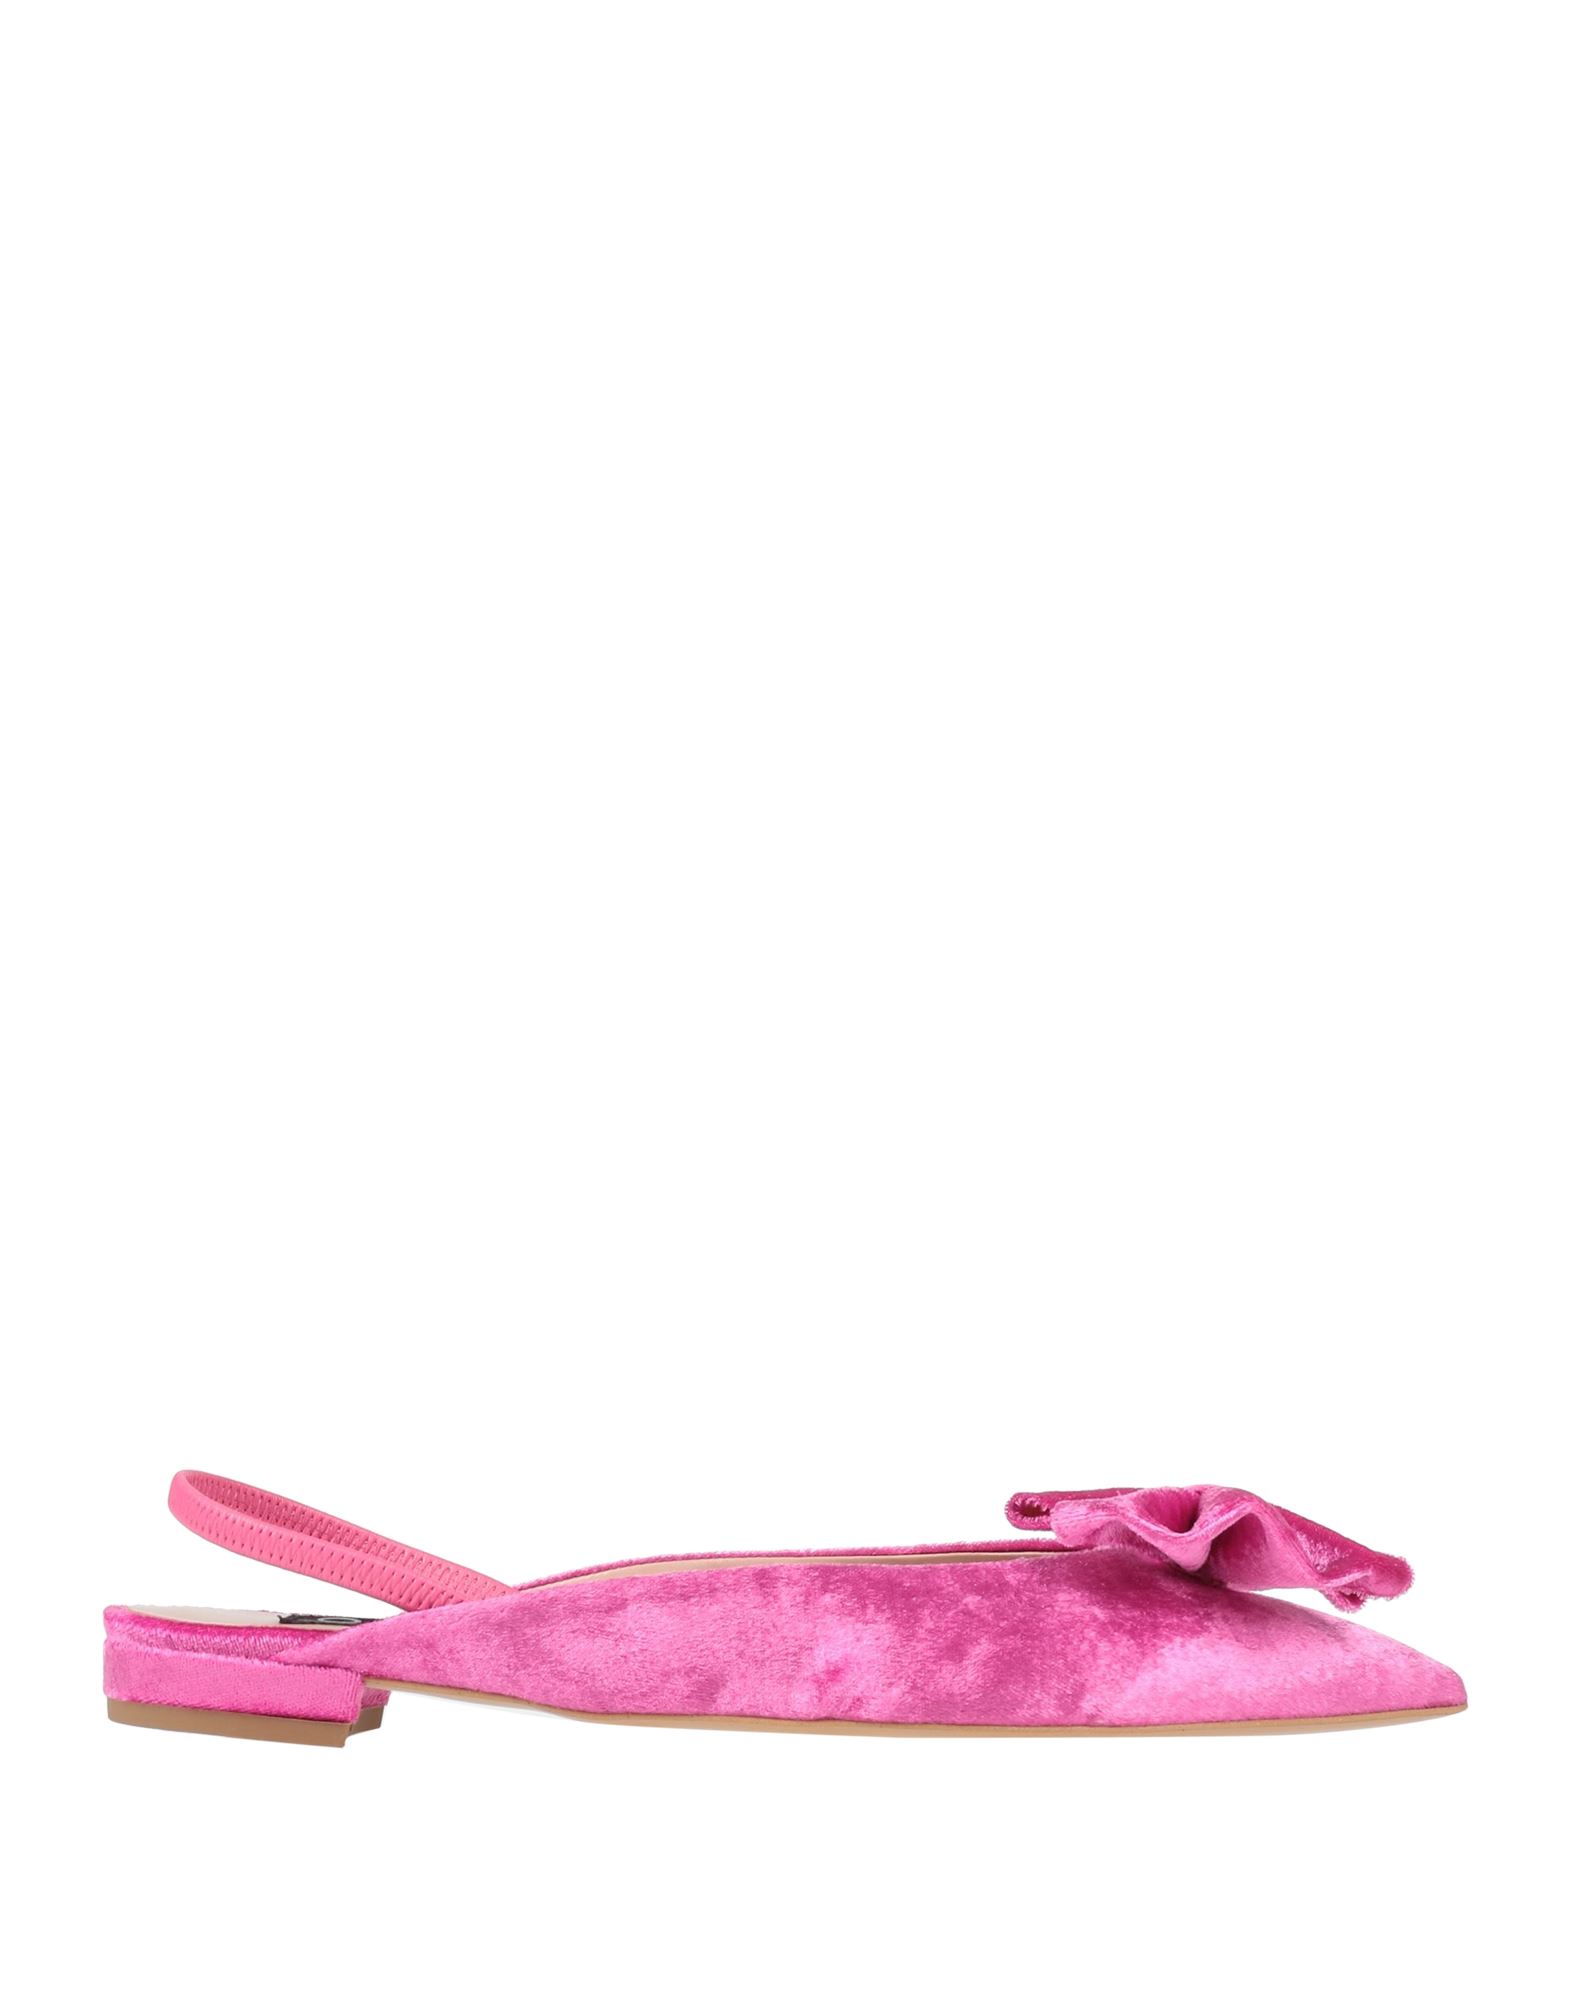 Islo Isabella Lorusso Ballet Flats In Pink | ModeSens